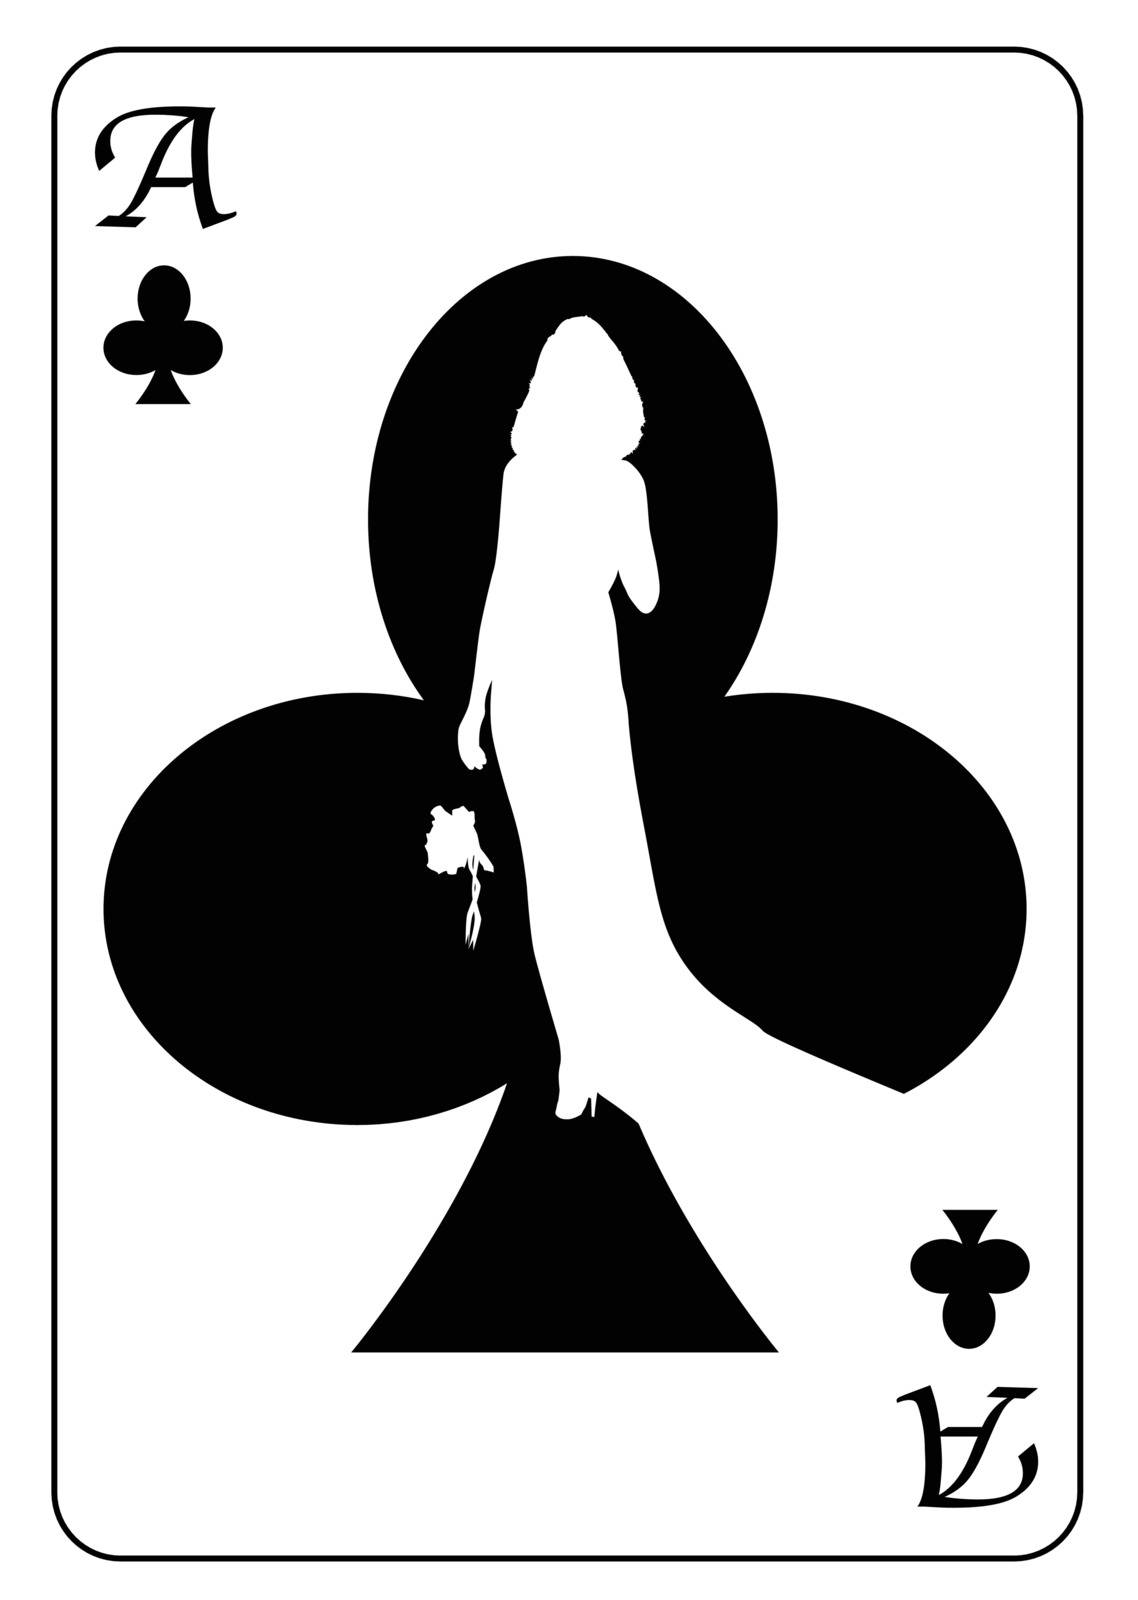 Ace of Clubs by Bigalbaloo